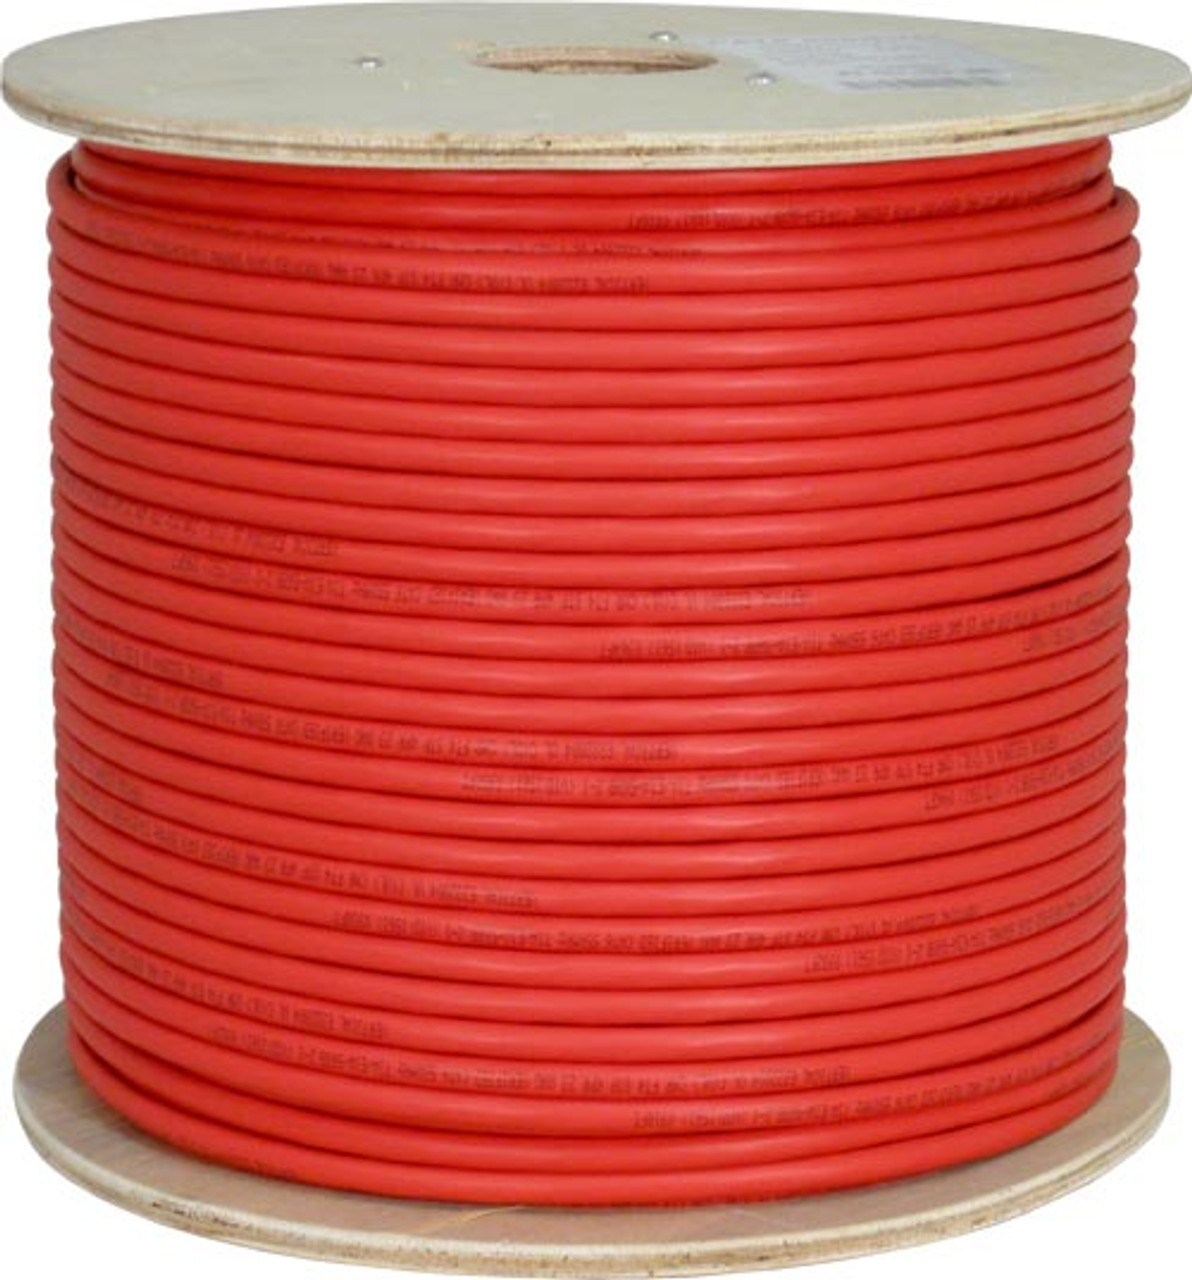 CAT6A (Augmented) 10Gb, Shielded F/UTP , 1000, 8-Conductor, PVC Jacket, AWG23 Solid-Bare Copper, 1000ft Wooden Spool, Red